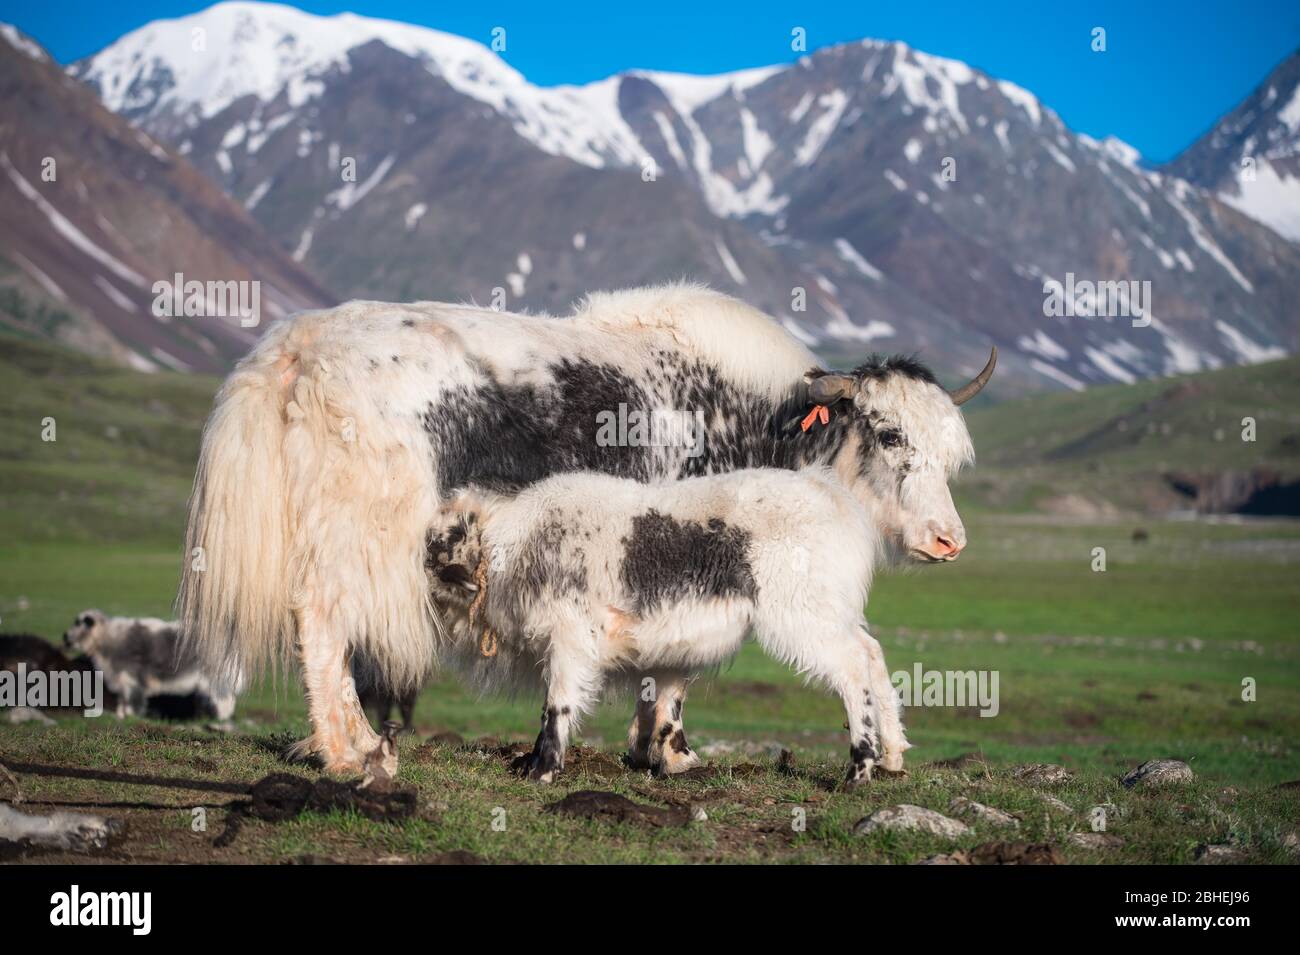 White Yak (Bos grunniens), mother suckles young, Altai Mountains, Bayan-Ulgii Province, Mongolia, Asia Stock Photo